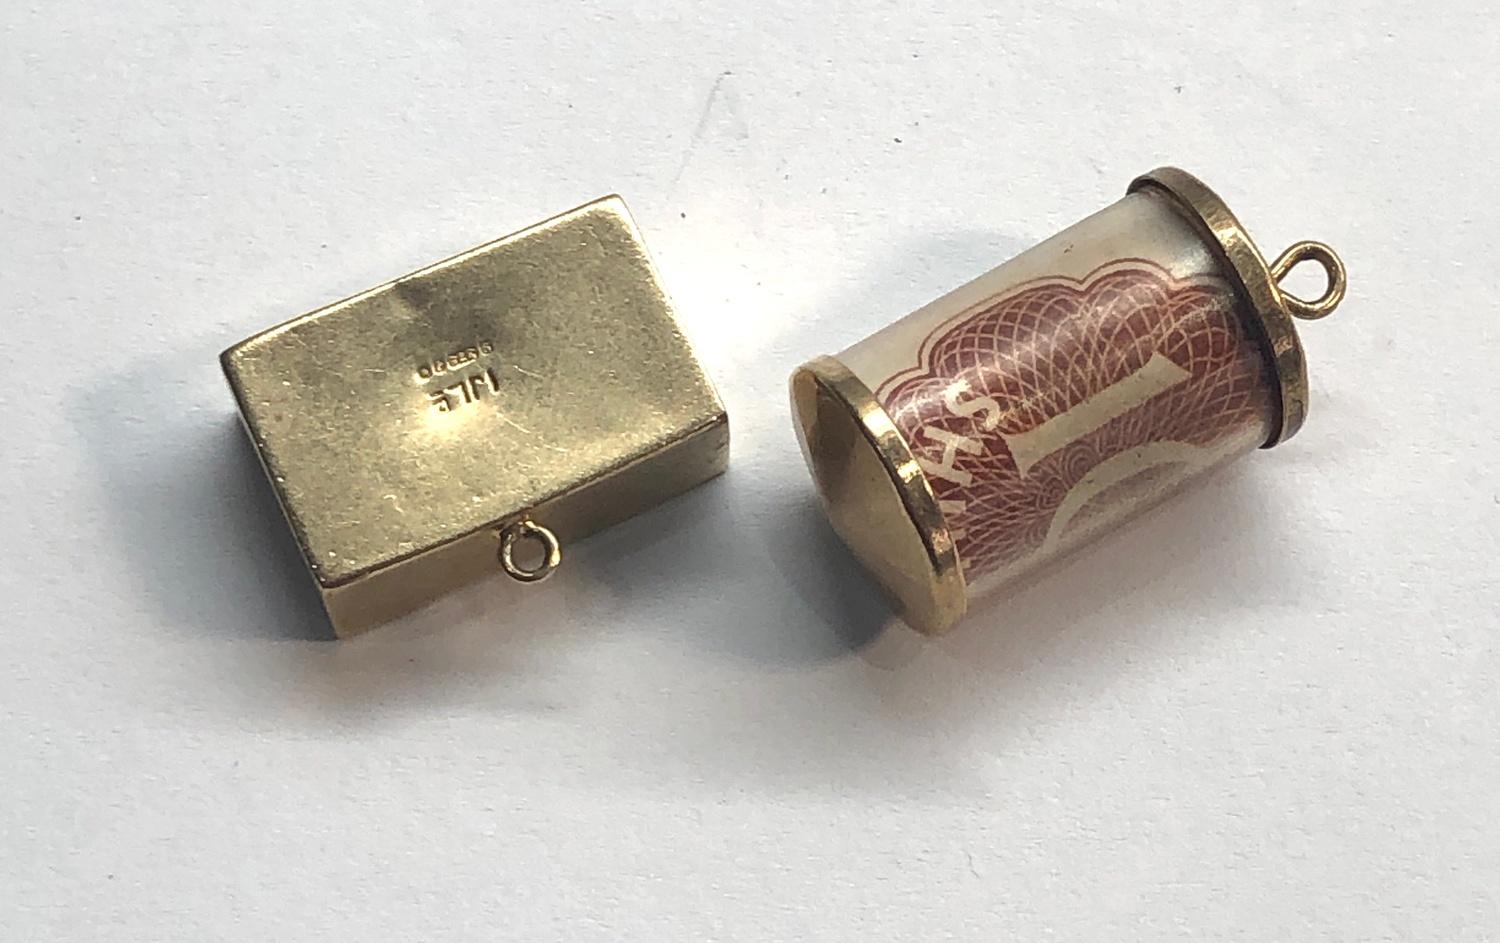 2 9ct gold note charms £5 and 10 shilling both in good condition - Image 2 of 2